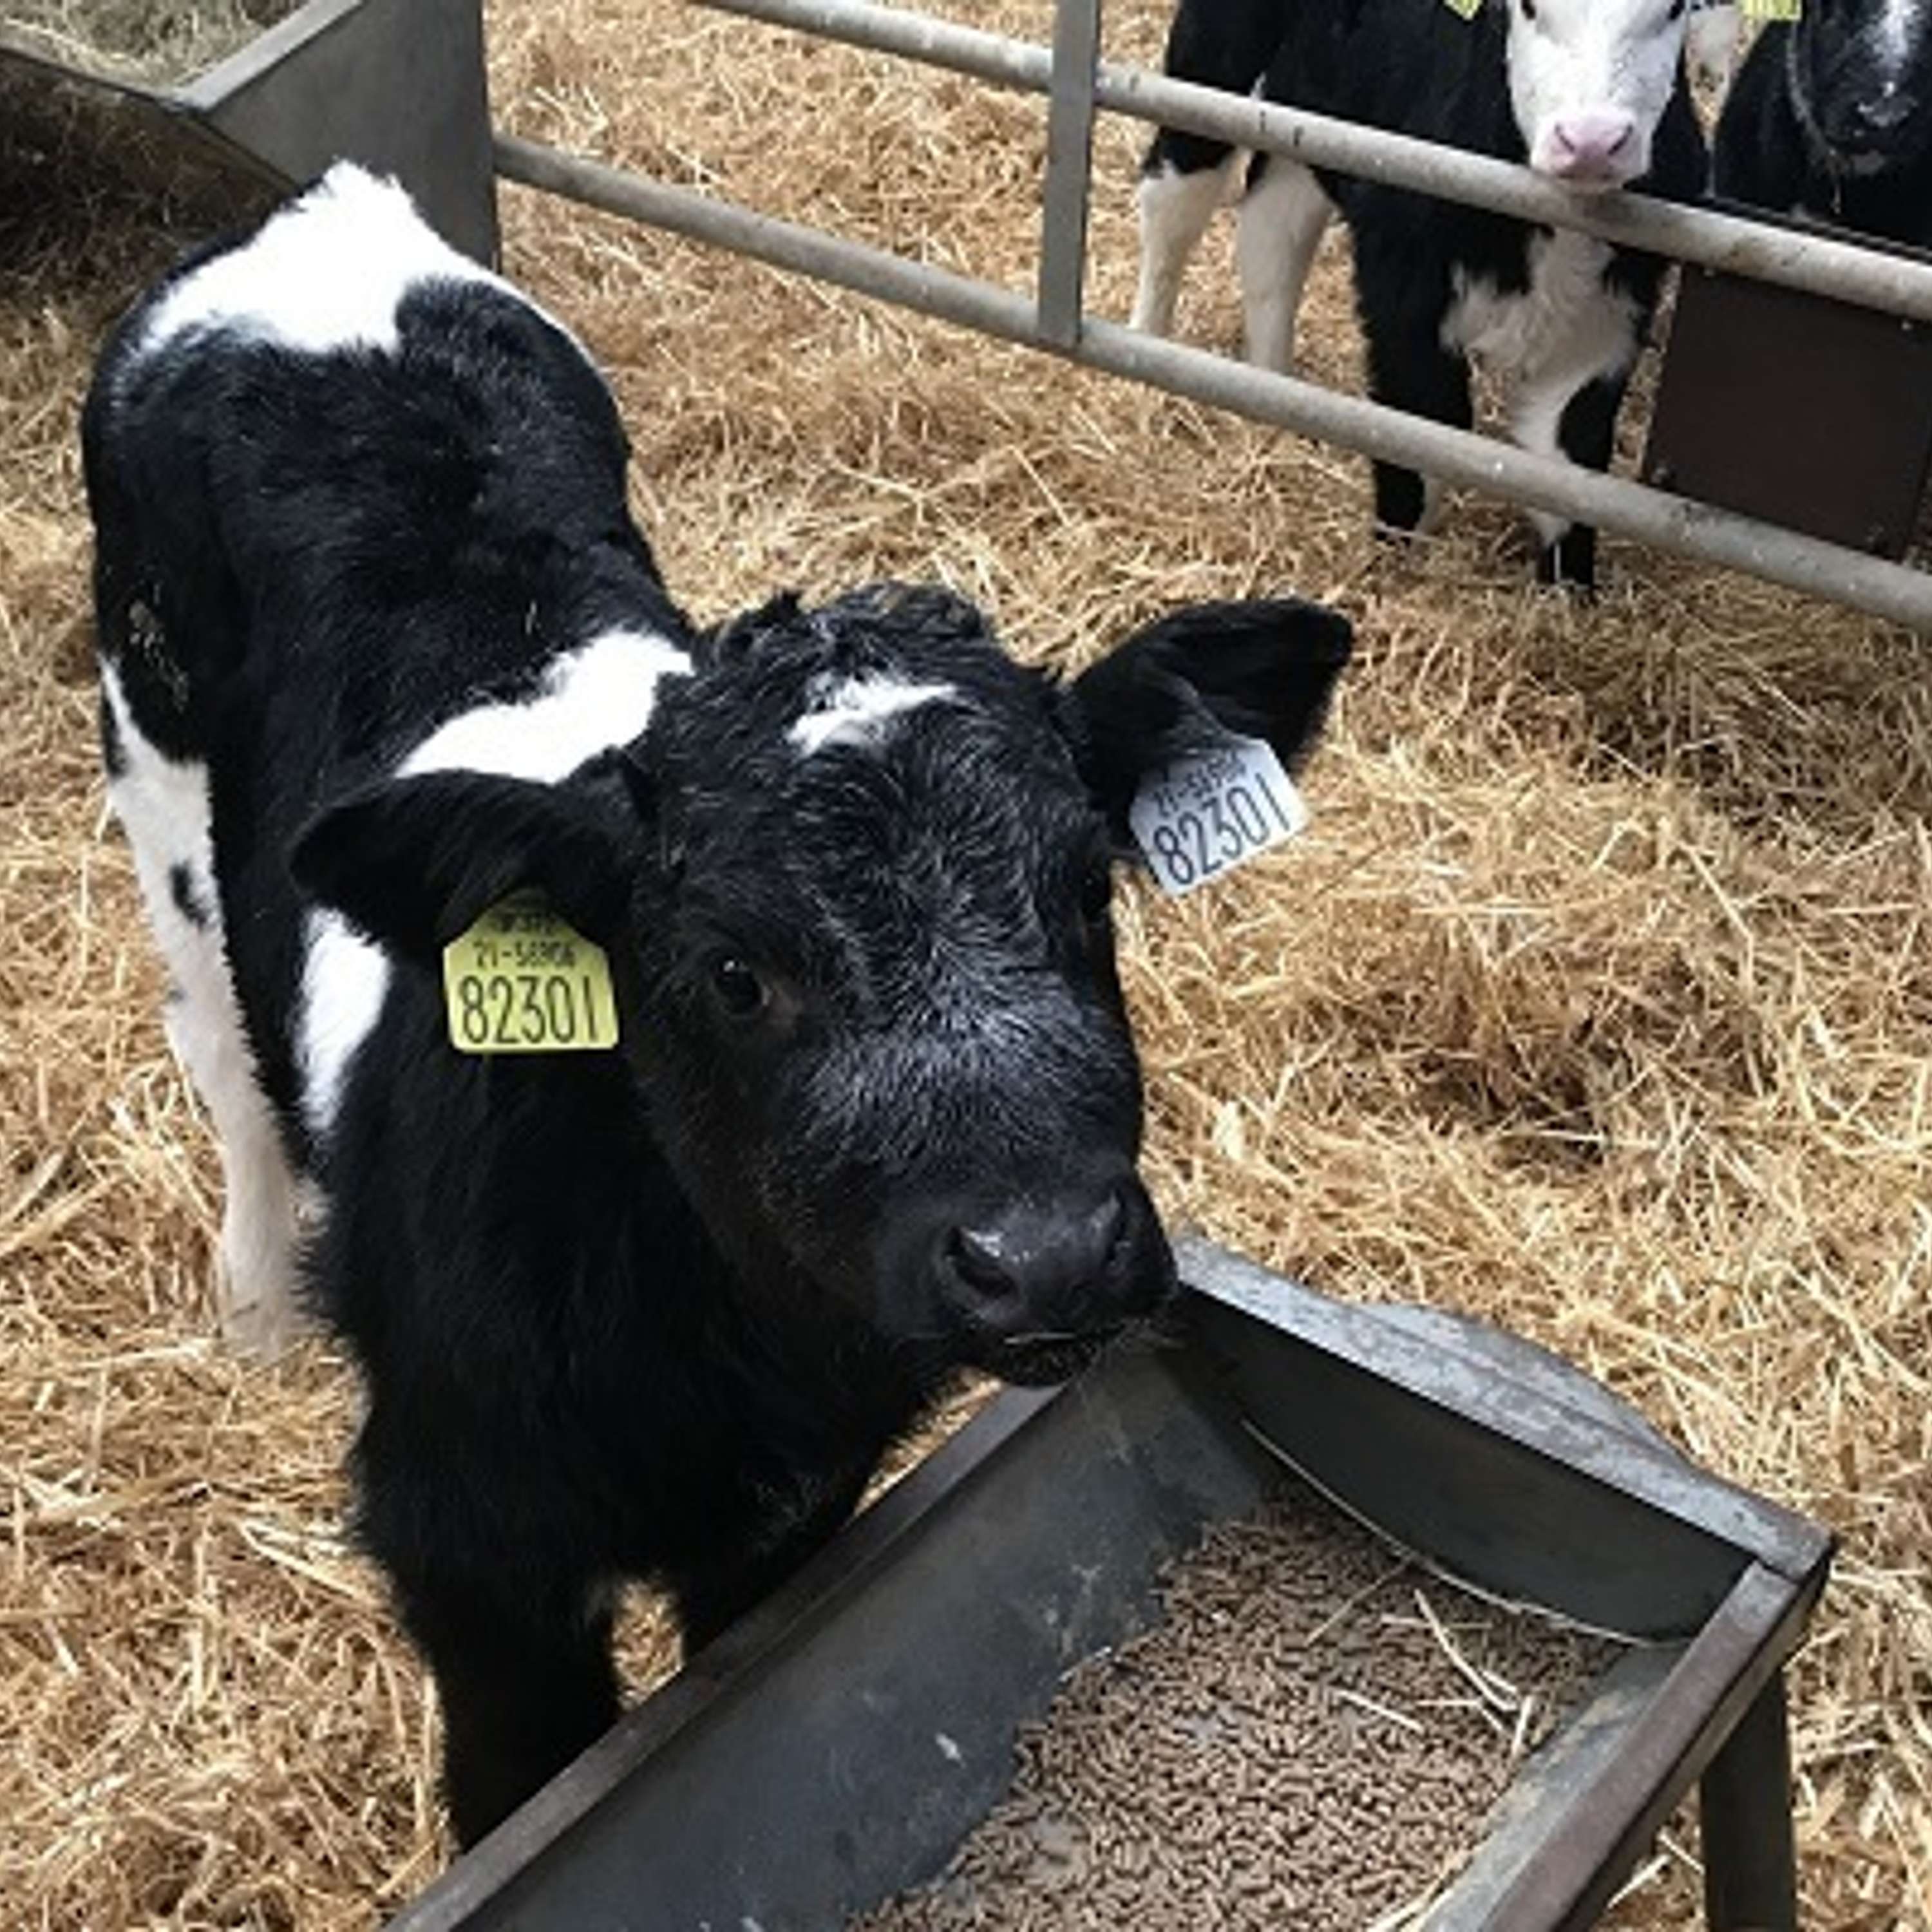 The key points for sourcing, rearing and weaning calves